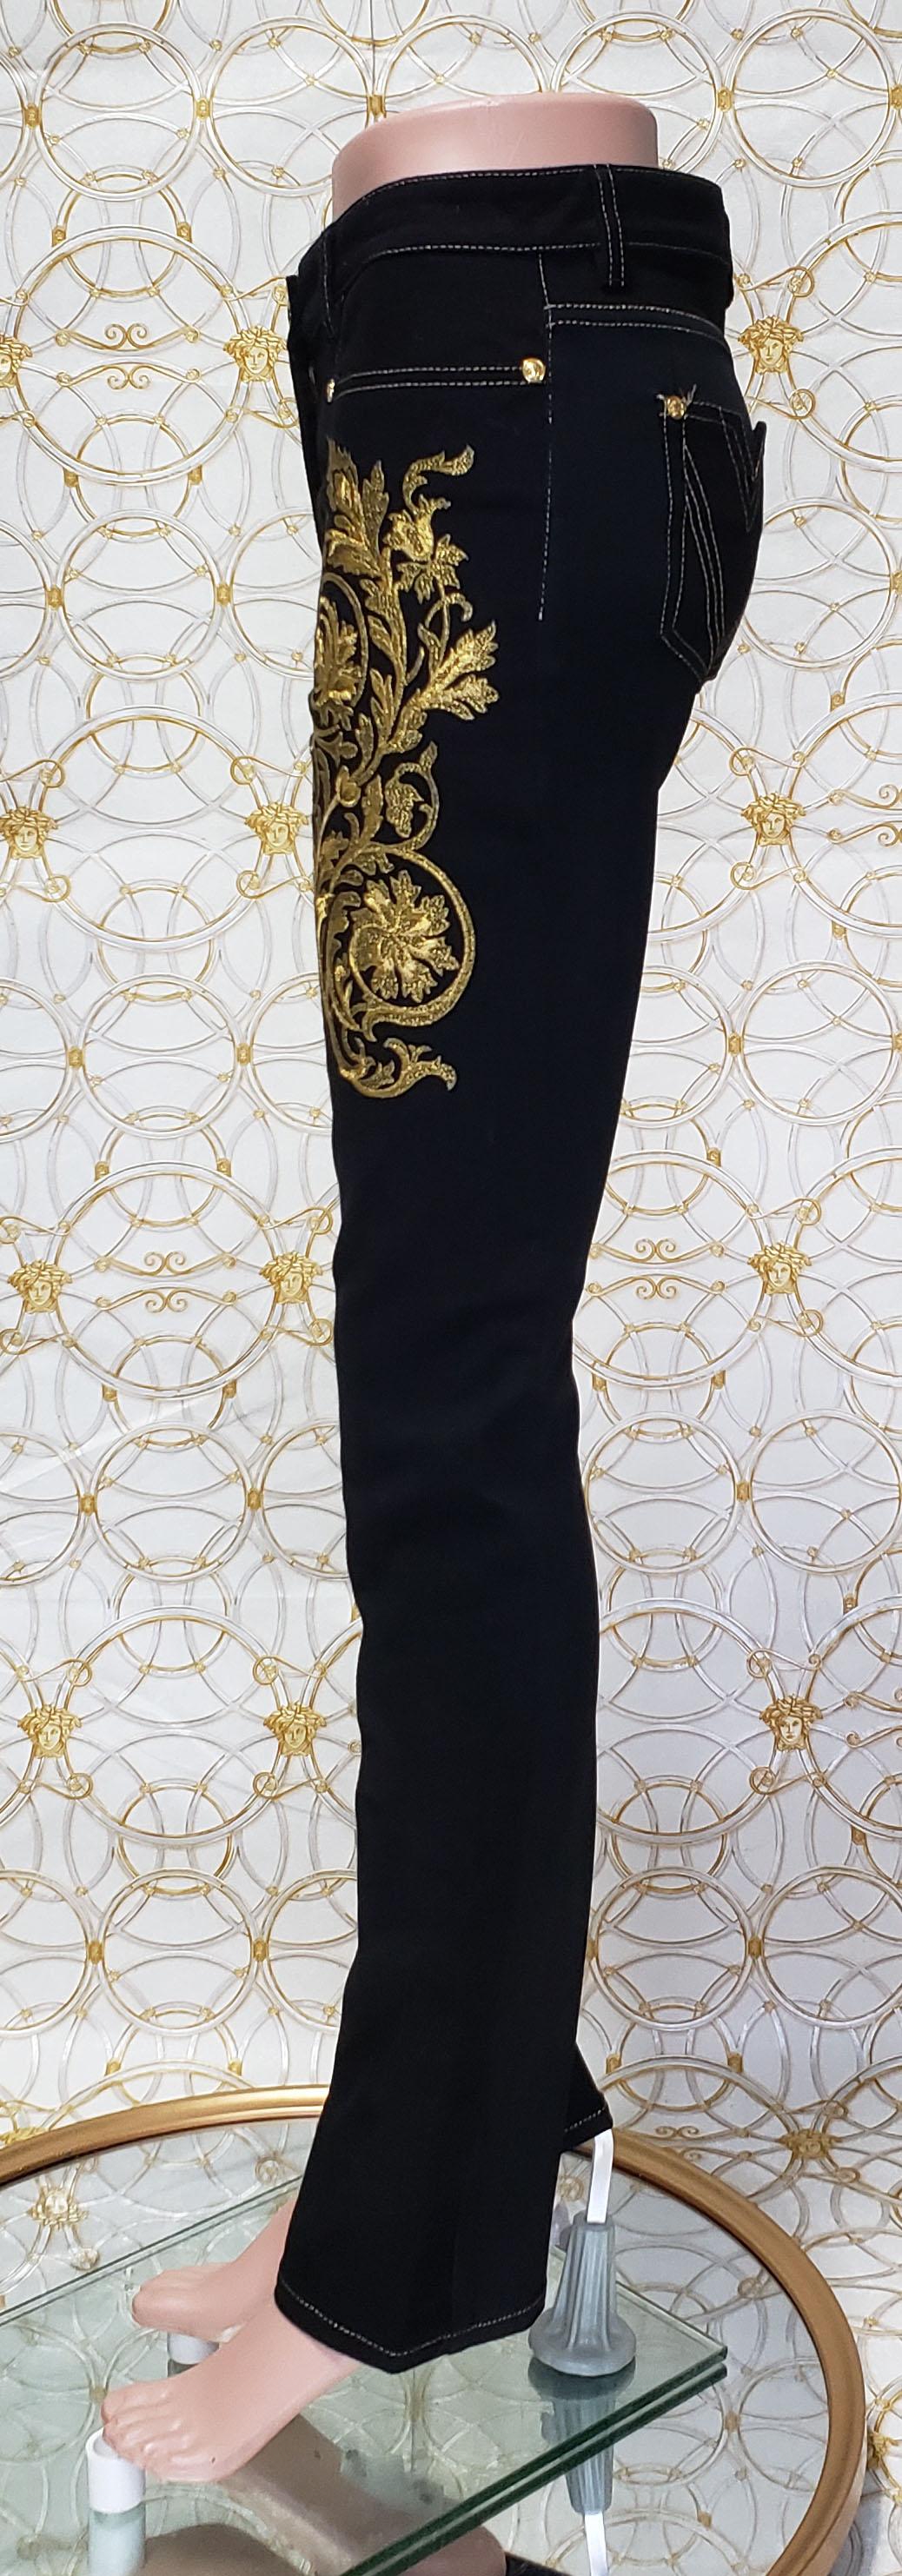 Pre-Fall 2013 L # 2 BRAND NEW VERSACE BAROQUE GOLD EMBROIDERED JEANS size 26 For Sale 1